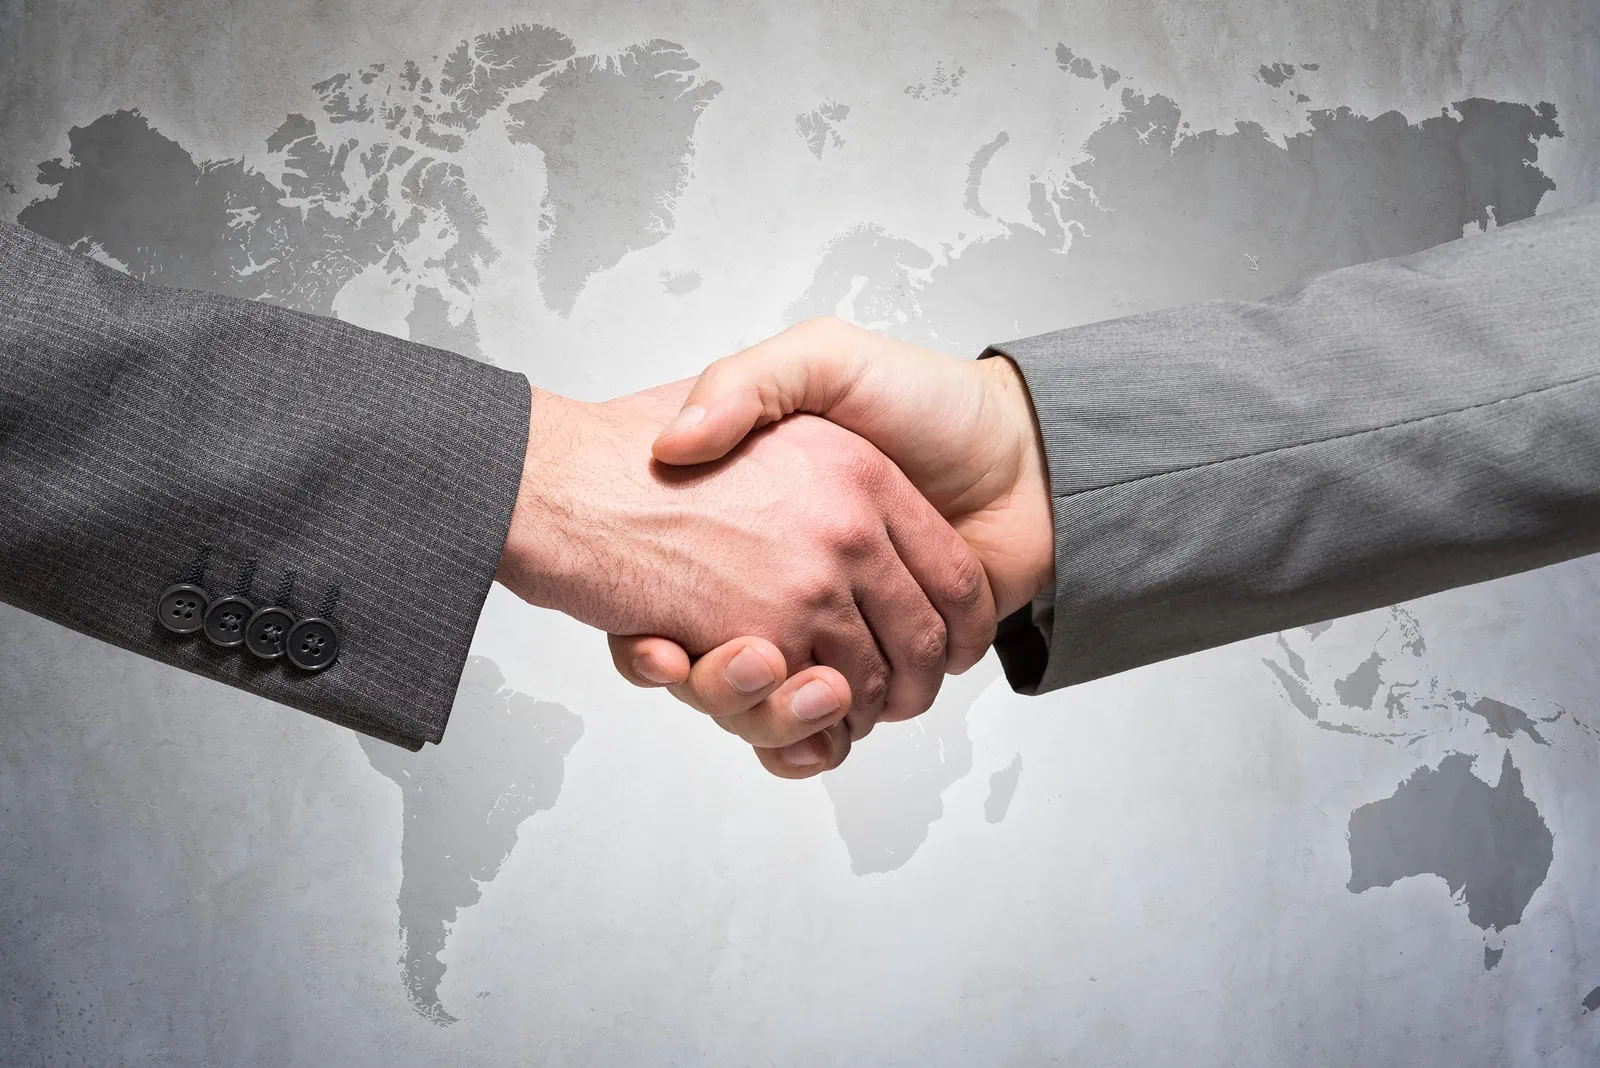 arms of two people in business suits shaking hands